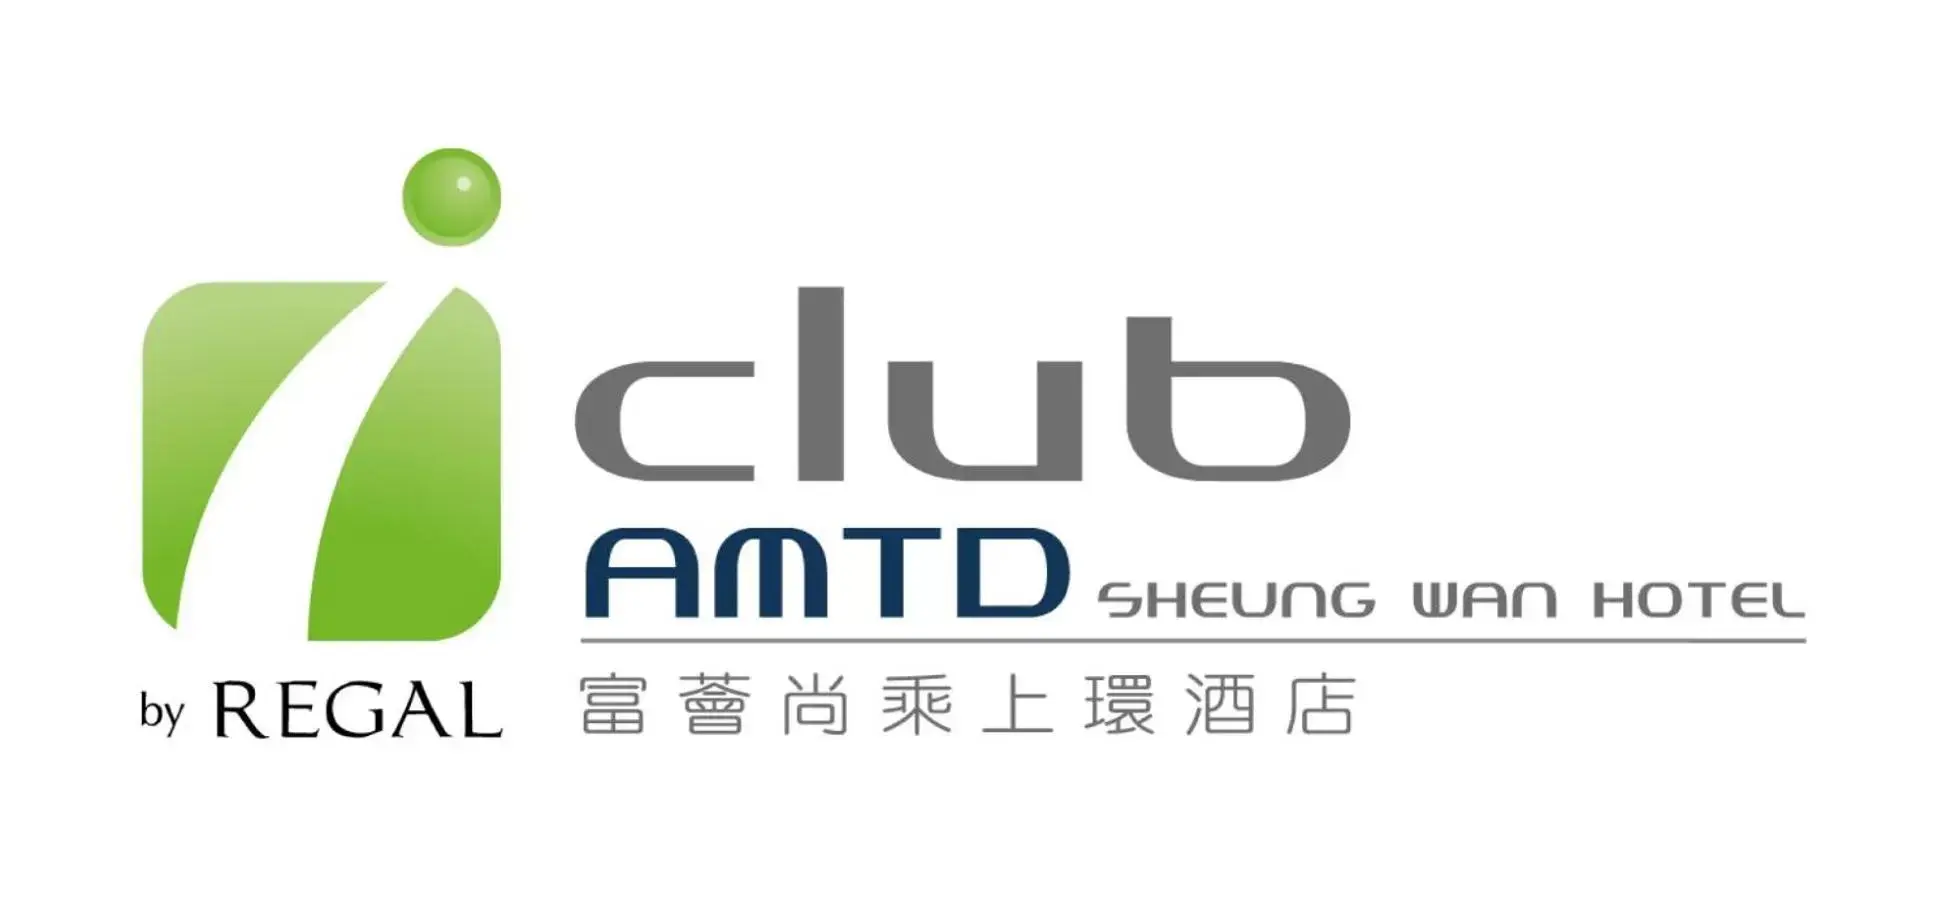 Property logo or sign in iclub AMTD Sheung Wan Hotel